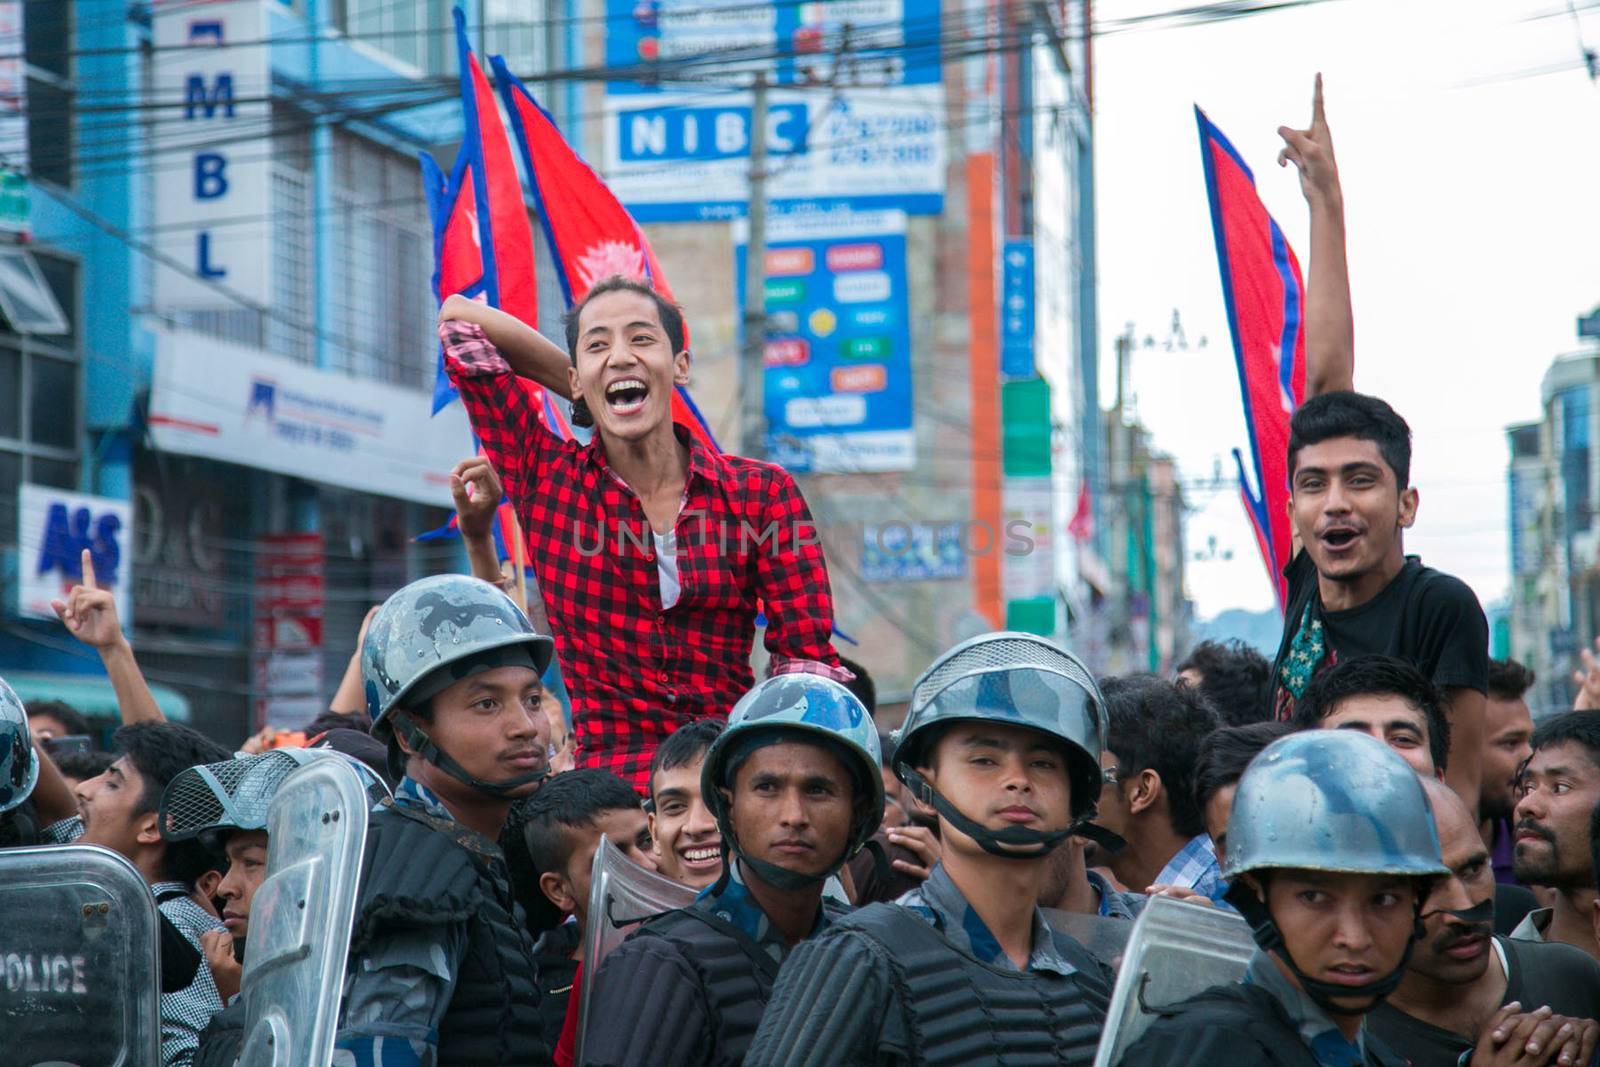 NEPAL, Kathmandu: After years of debate, Nepal adopted a new constitution on September 20, 2015, prompting scores of residents to celebrate near the constituent assembly building in Kathmandu. Out of the 598 members of the Constituent Assembly, 507 voted for the new constitution, 25 voted against, and 66 abstained in a vote on September 16, 2015. The event was marked with fireworks and festivities, but also with protests organized by parties of the Tharu and Madhesi ethnic communities.